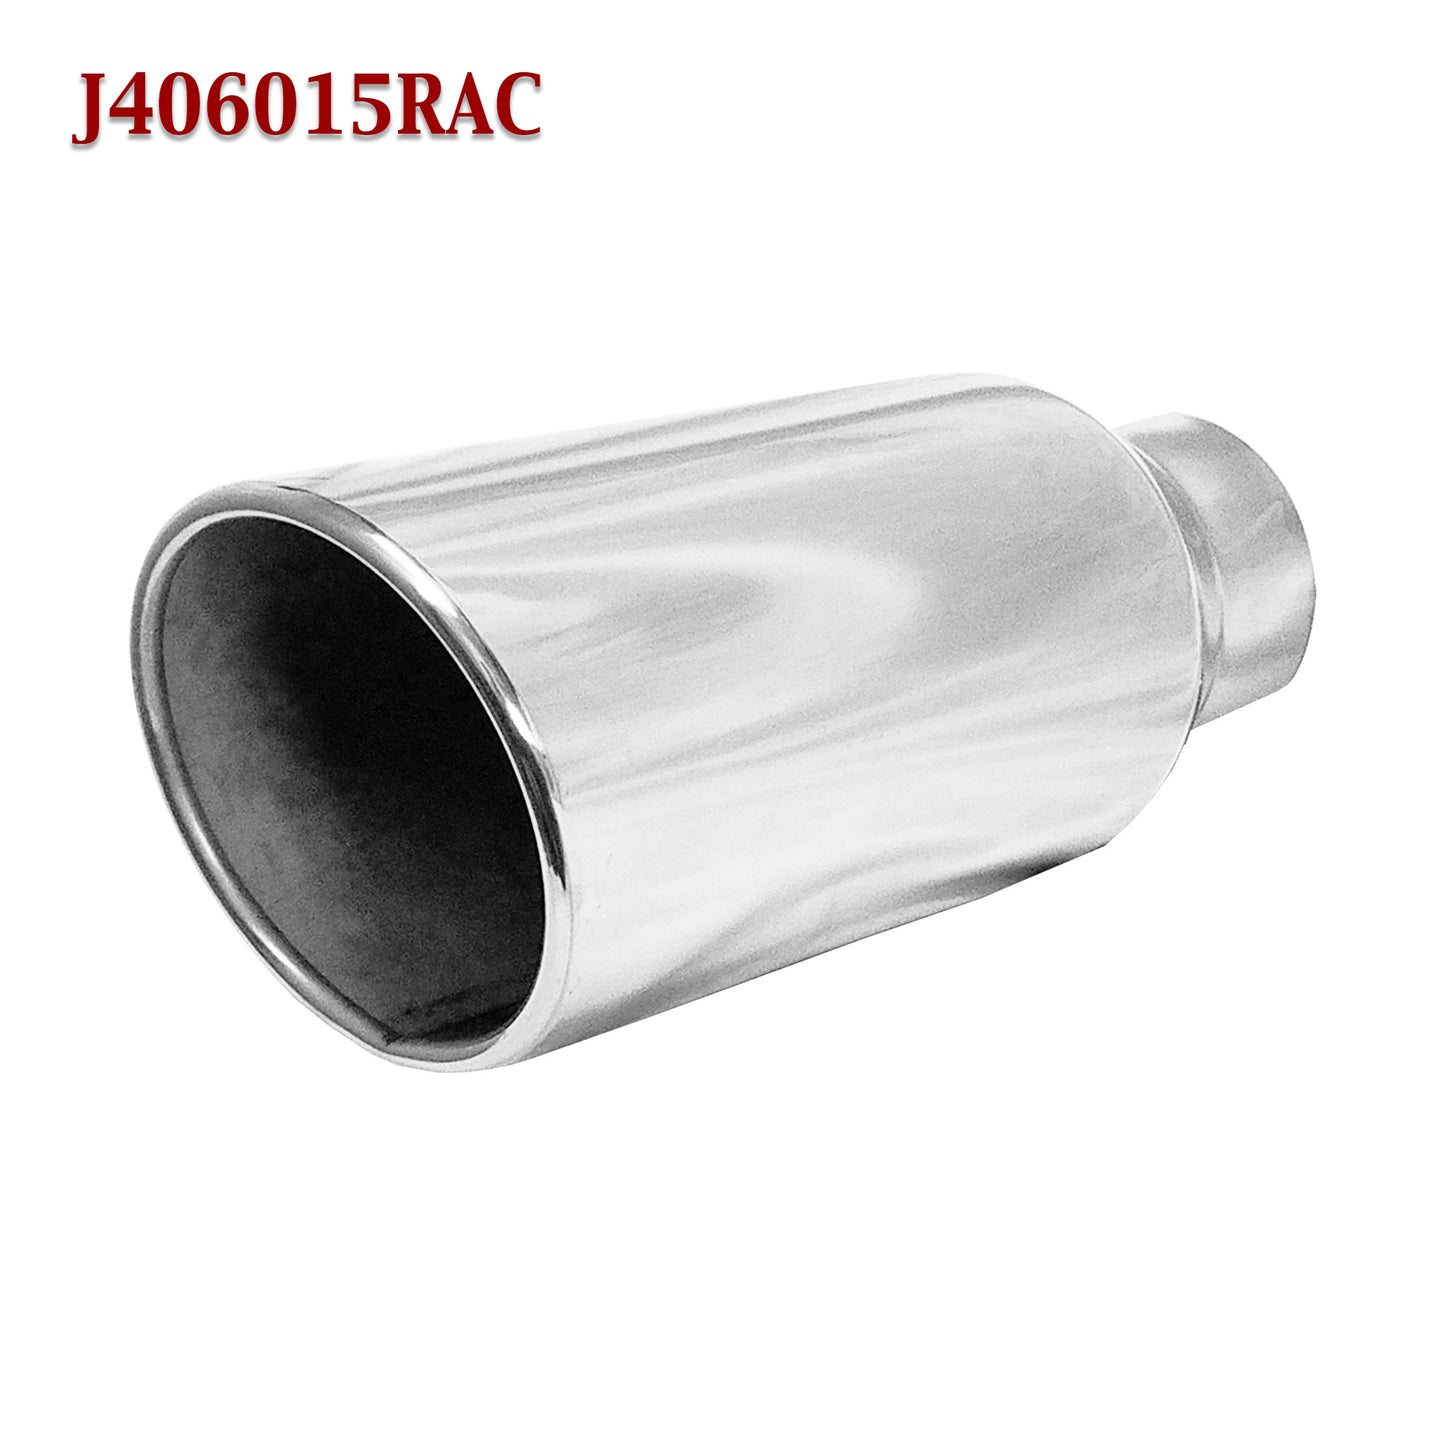 J406015RAC 4" Inlet Stainless Round Diesel Truck Exhaust Tip 6" Outlet 15" Long